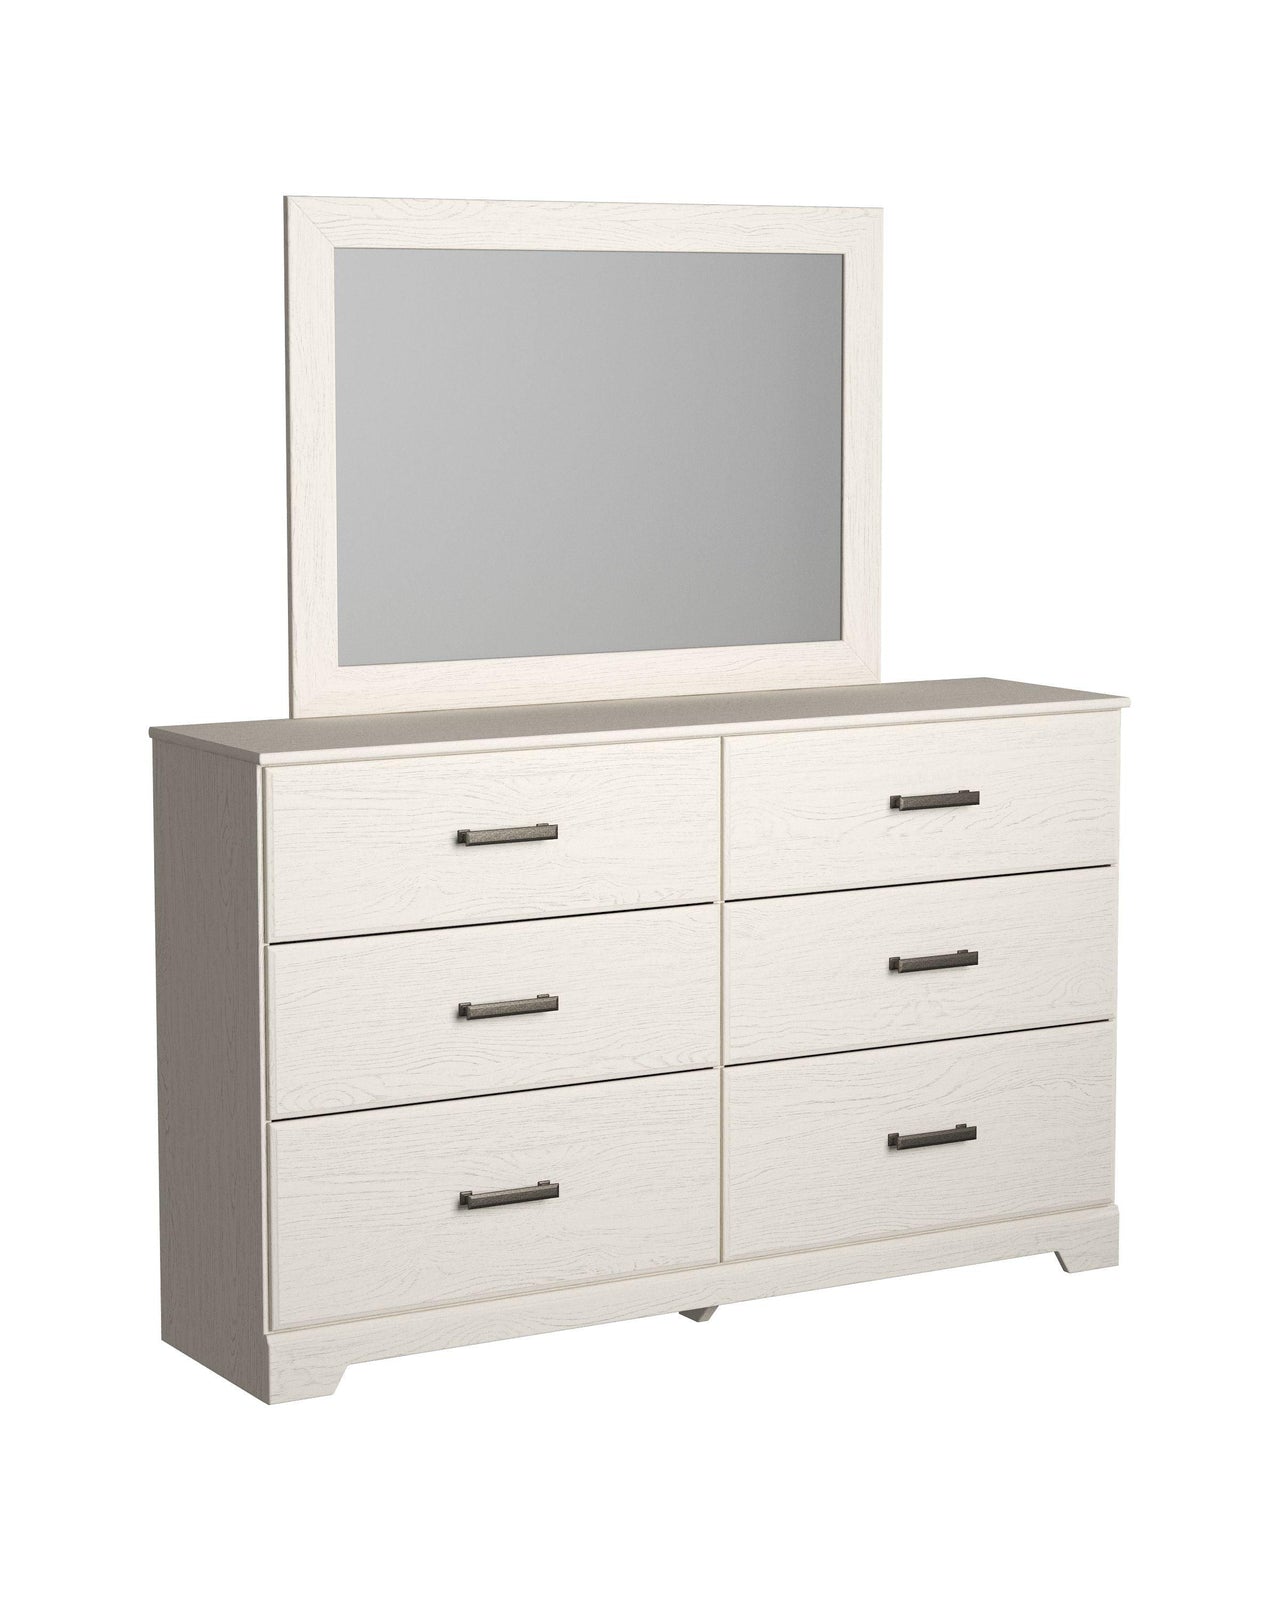 Stelsie - White - Bedroom Mirror Tony's Home Furnishings Furniture. Beds. Dressers. Sofas.